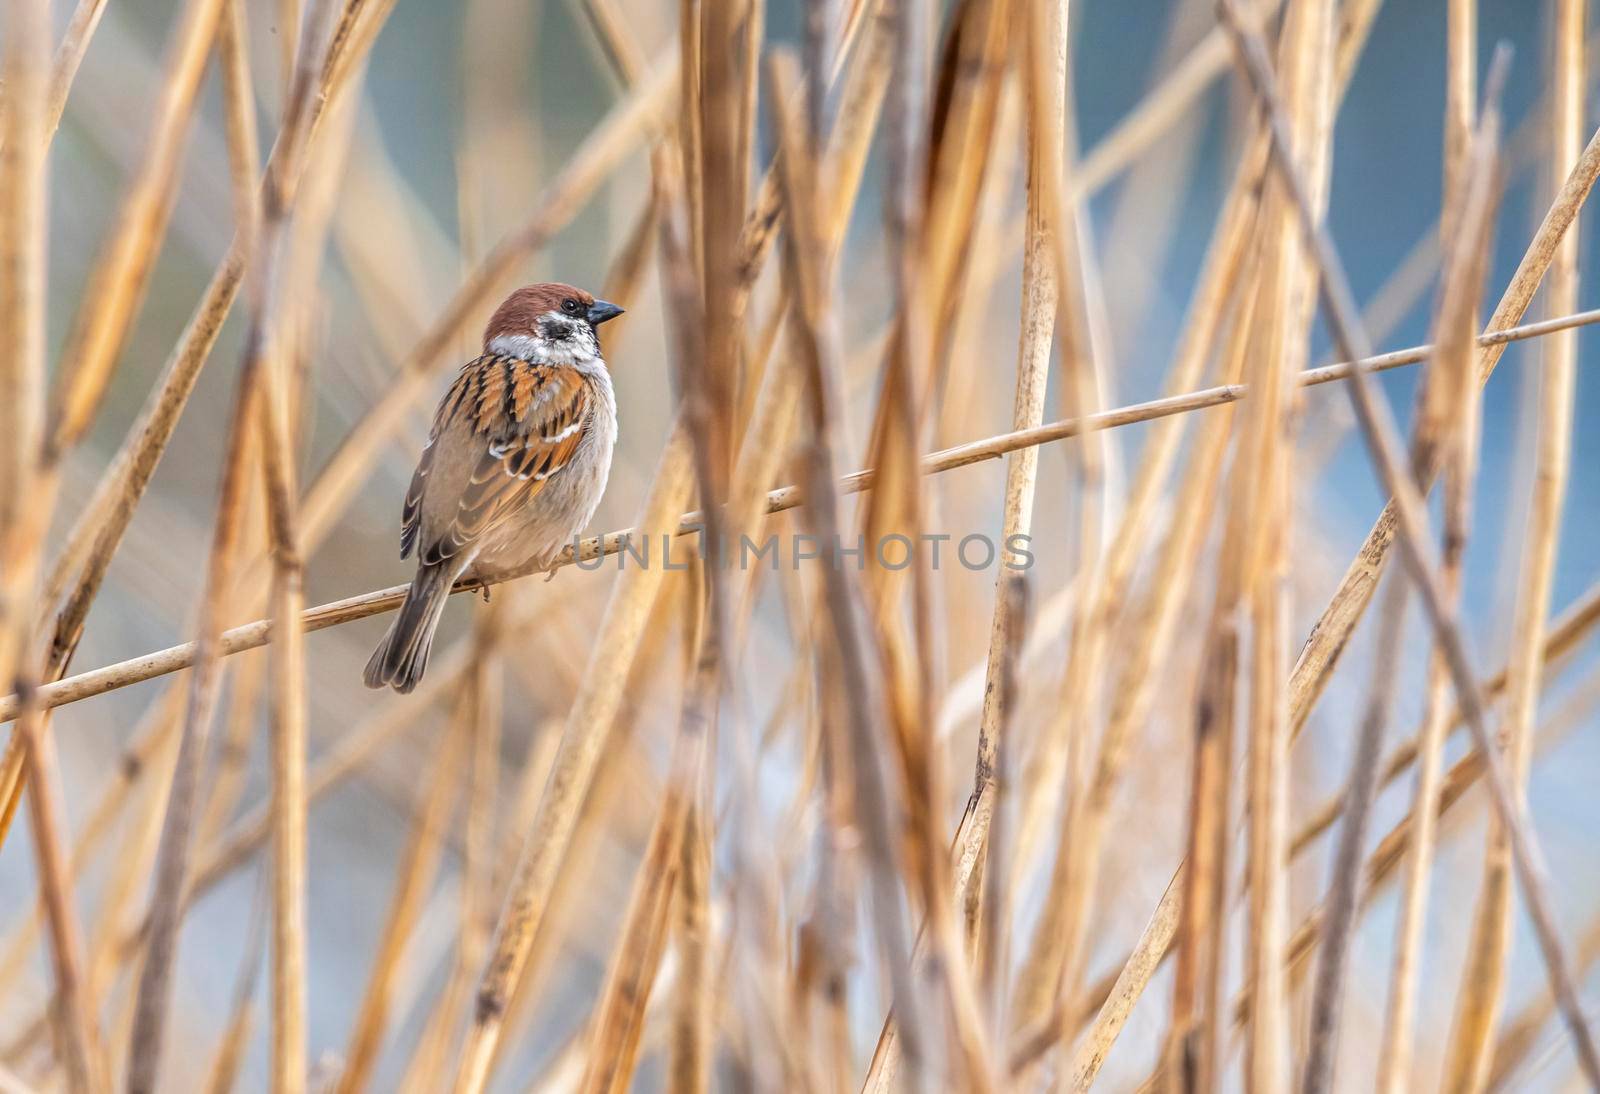 Male sparrow on a branch among the reeds by Elenaphotos21